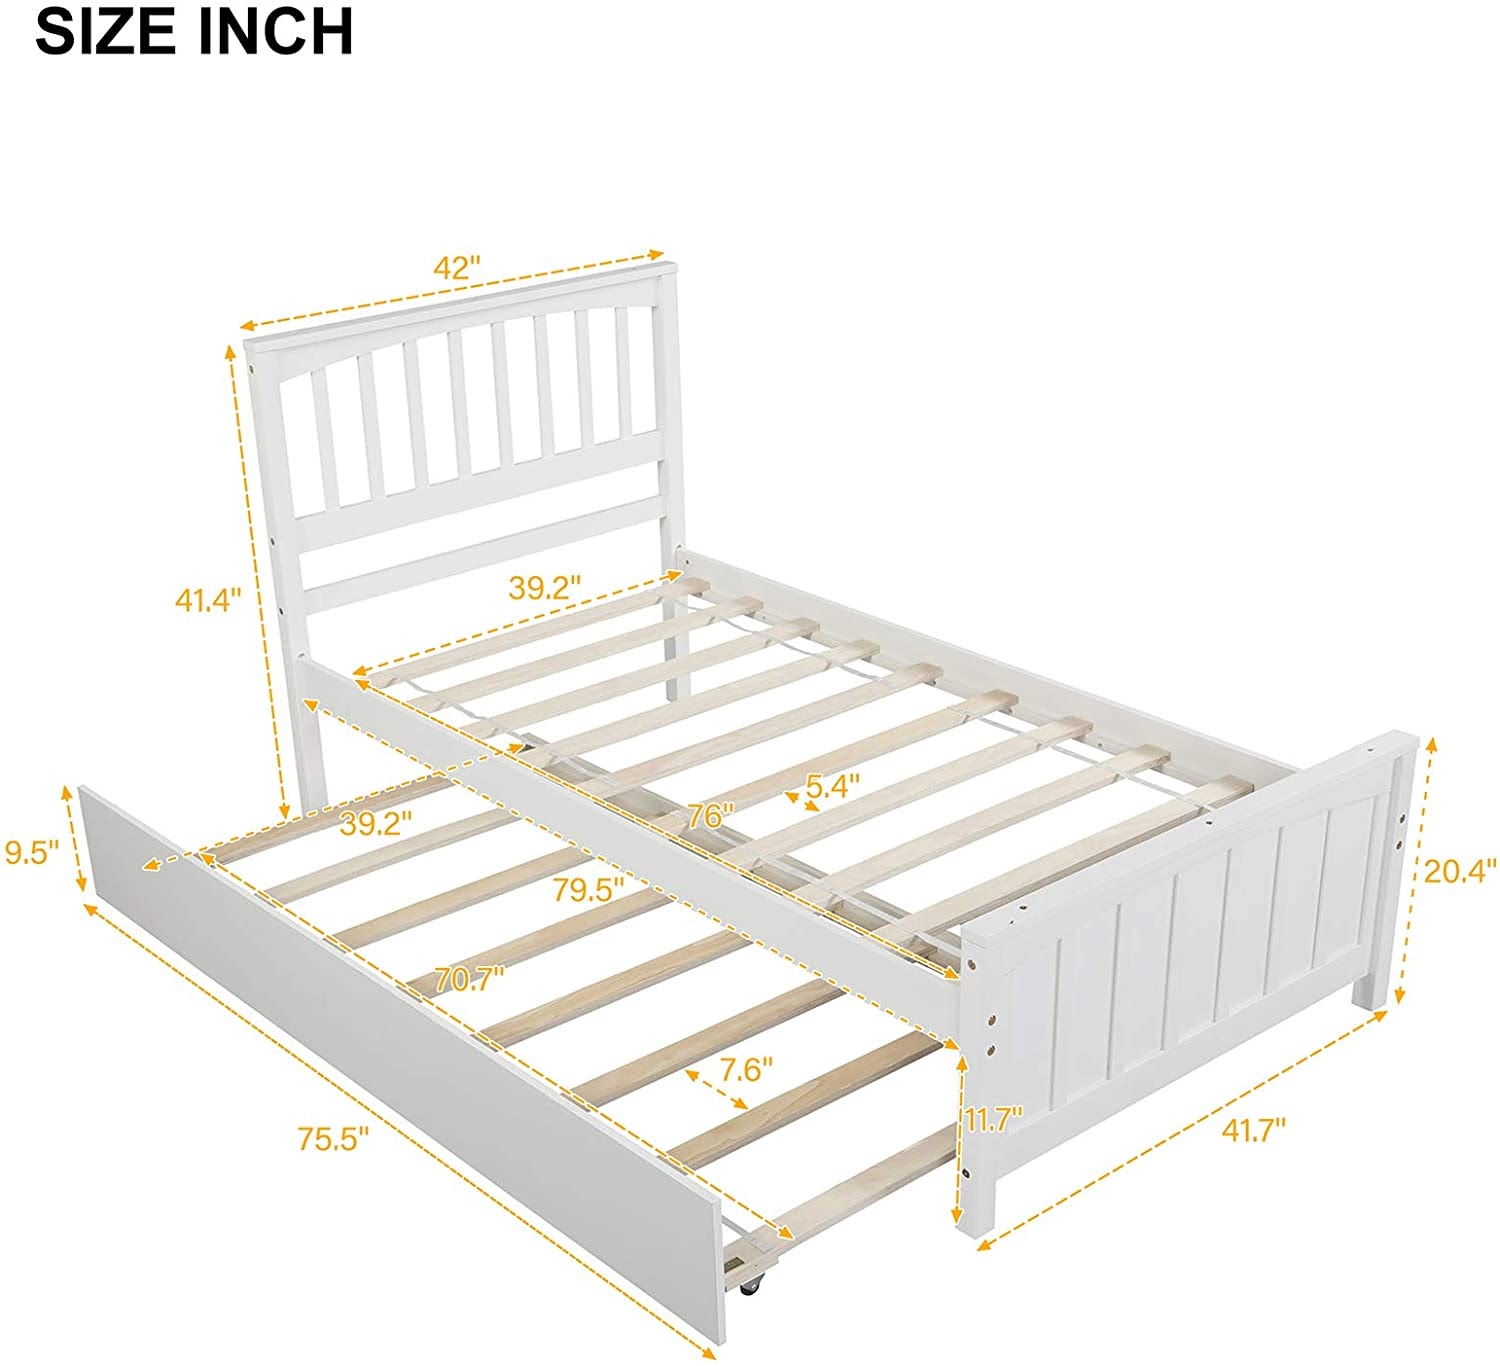 A slide-away bed like this would be ideal for a small room that has two young occupants.